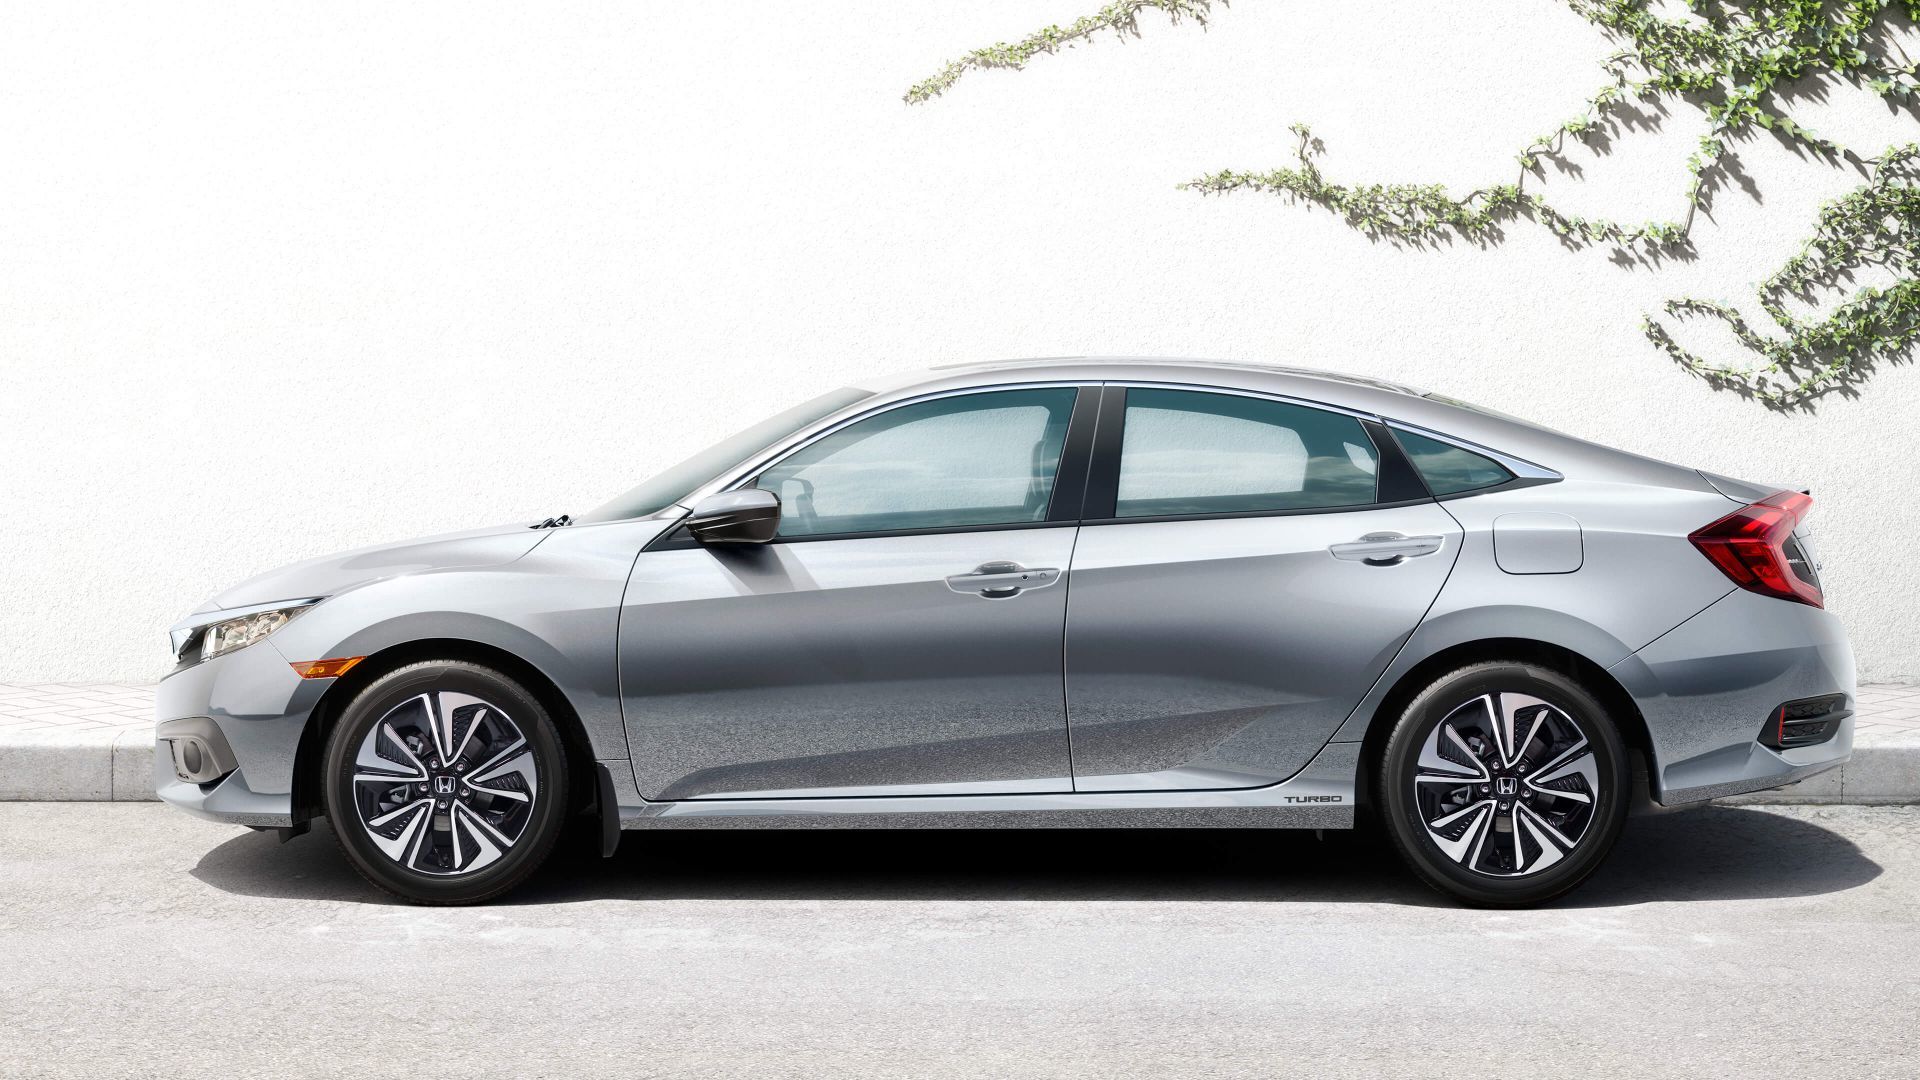 Side view of the 2018 Civic